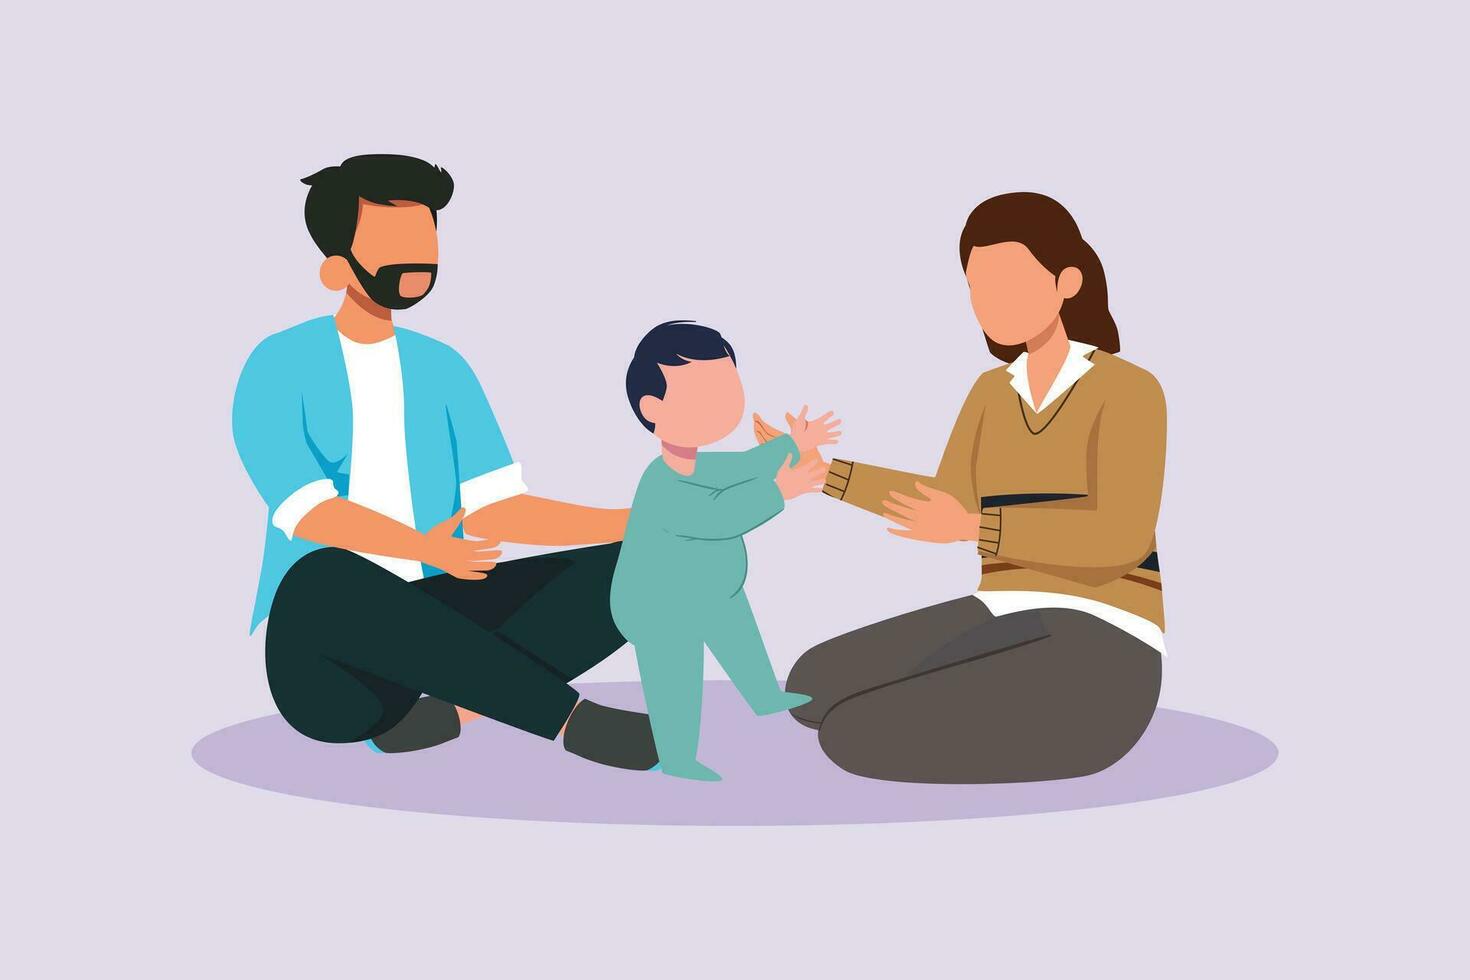 Parents with babies. Family maternity concept. Colored flat vector illustration isolated.